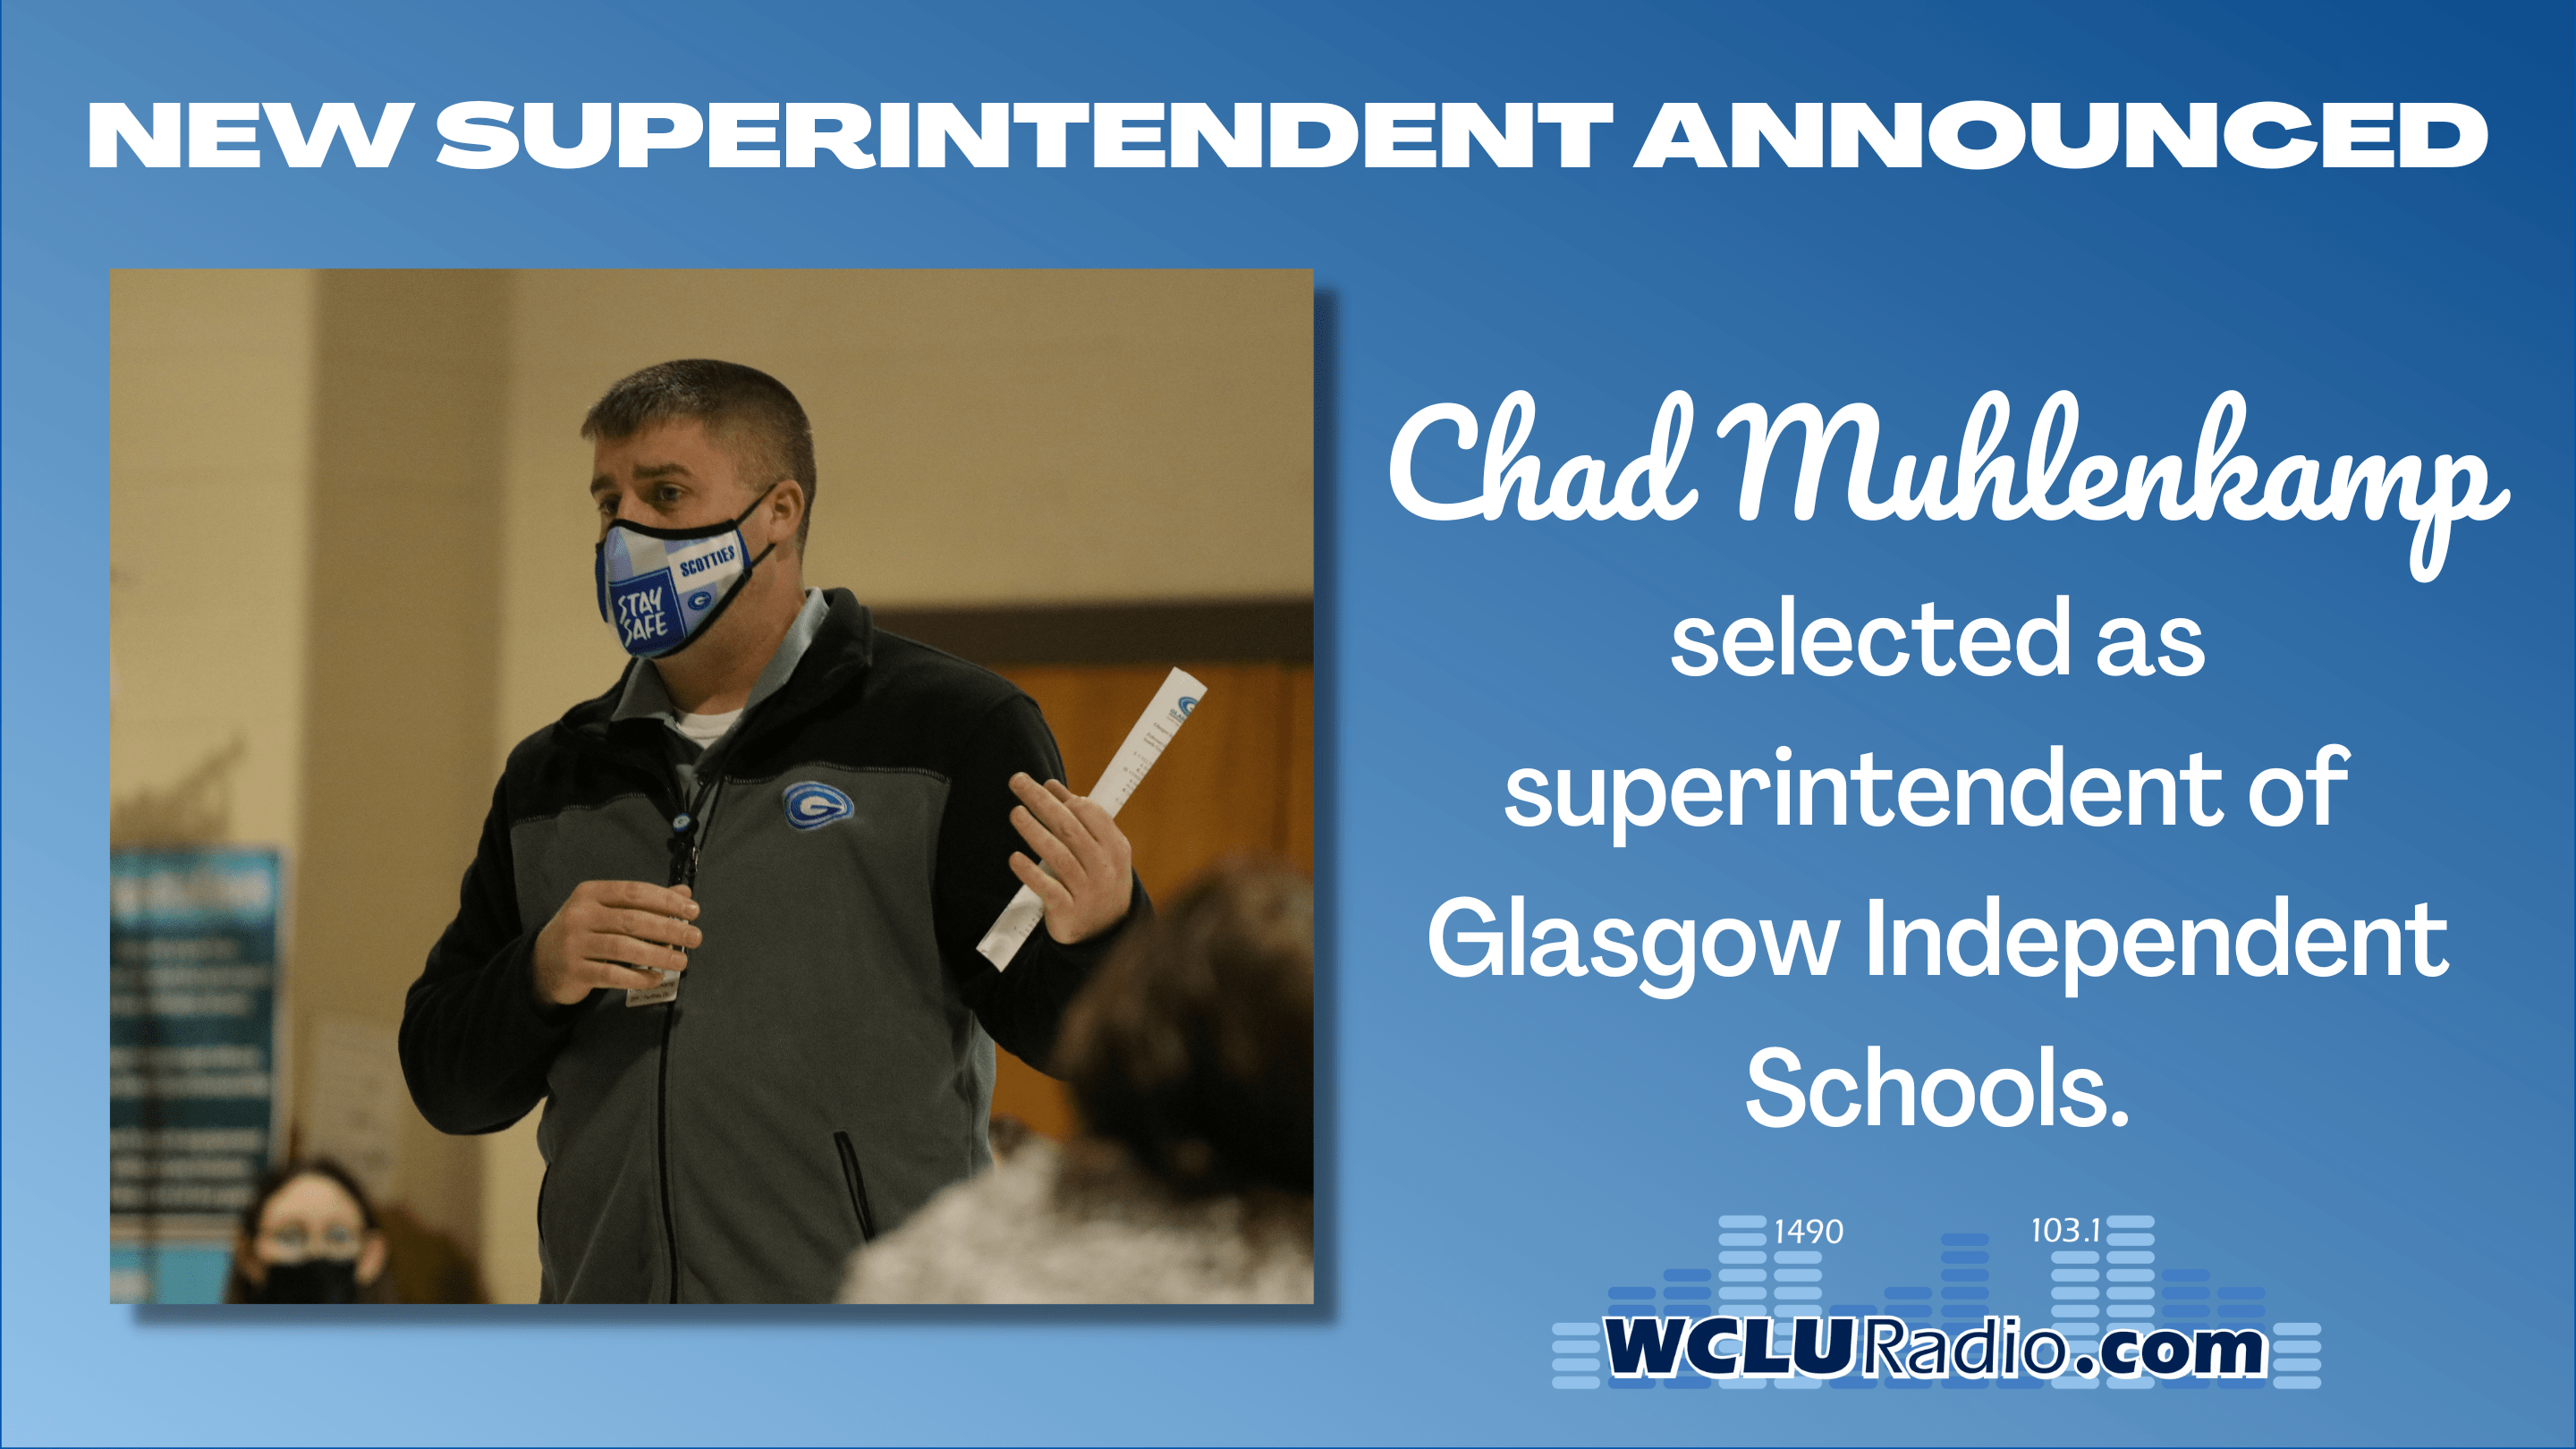 Muhlenkamp selected as superintendent of Glasgow Independent Schools